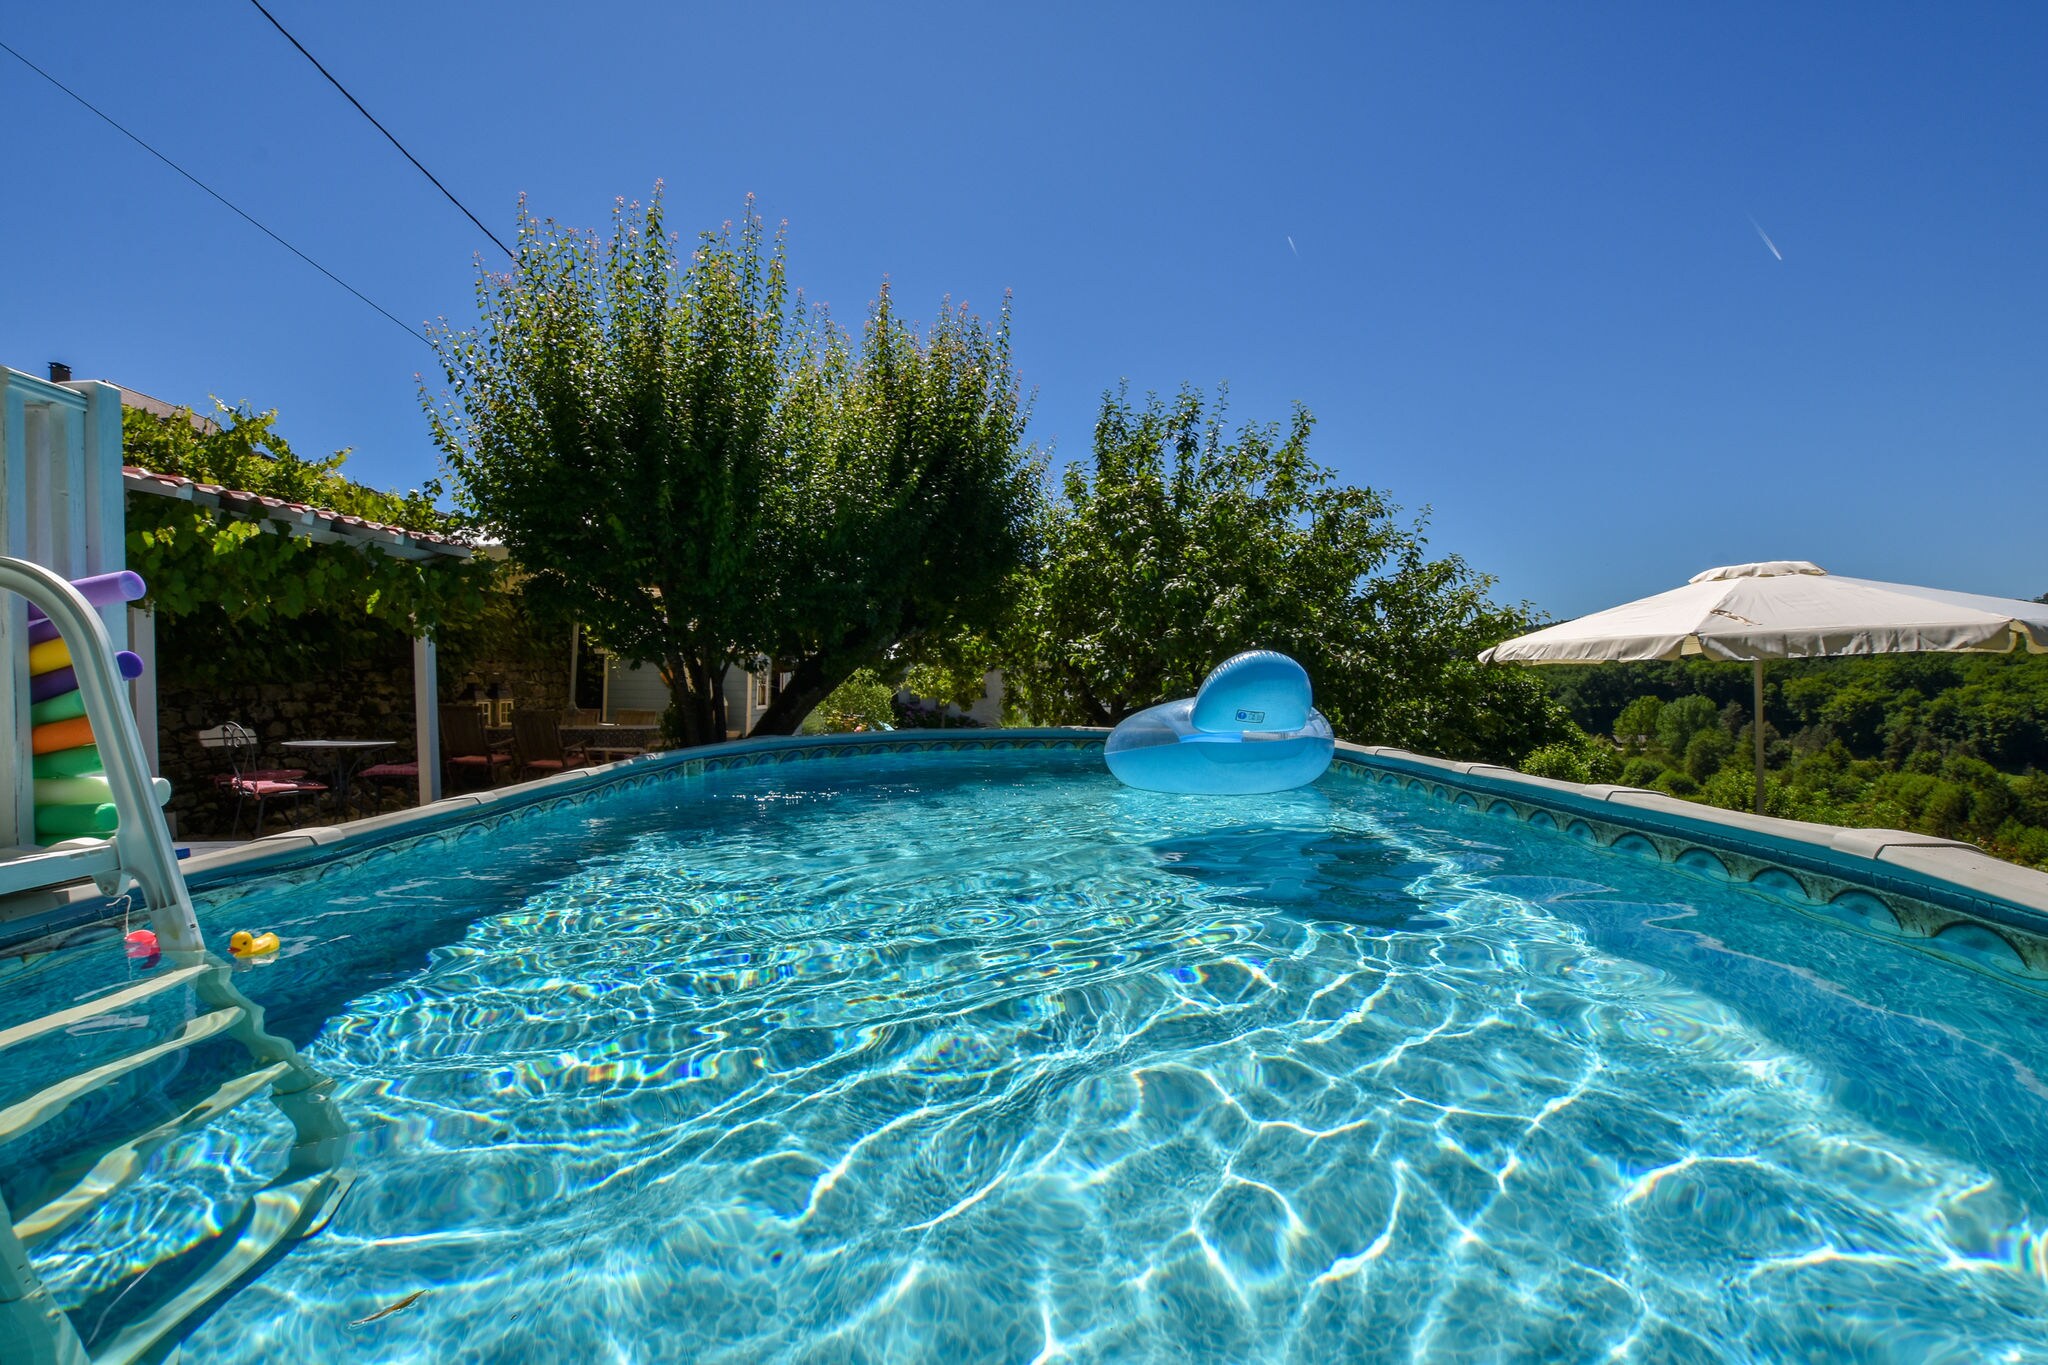 Cosy town house on the edge of a bastide with swimming pool and stunning views.